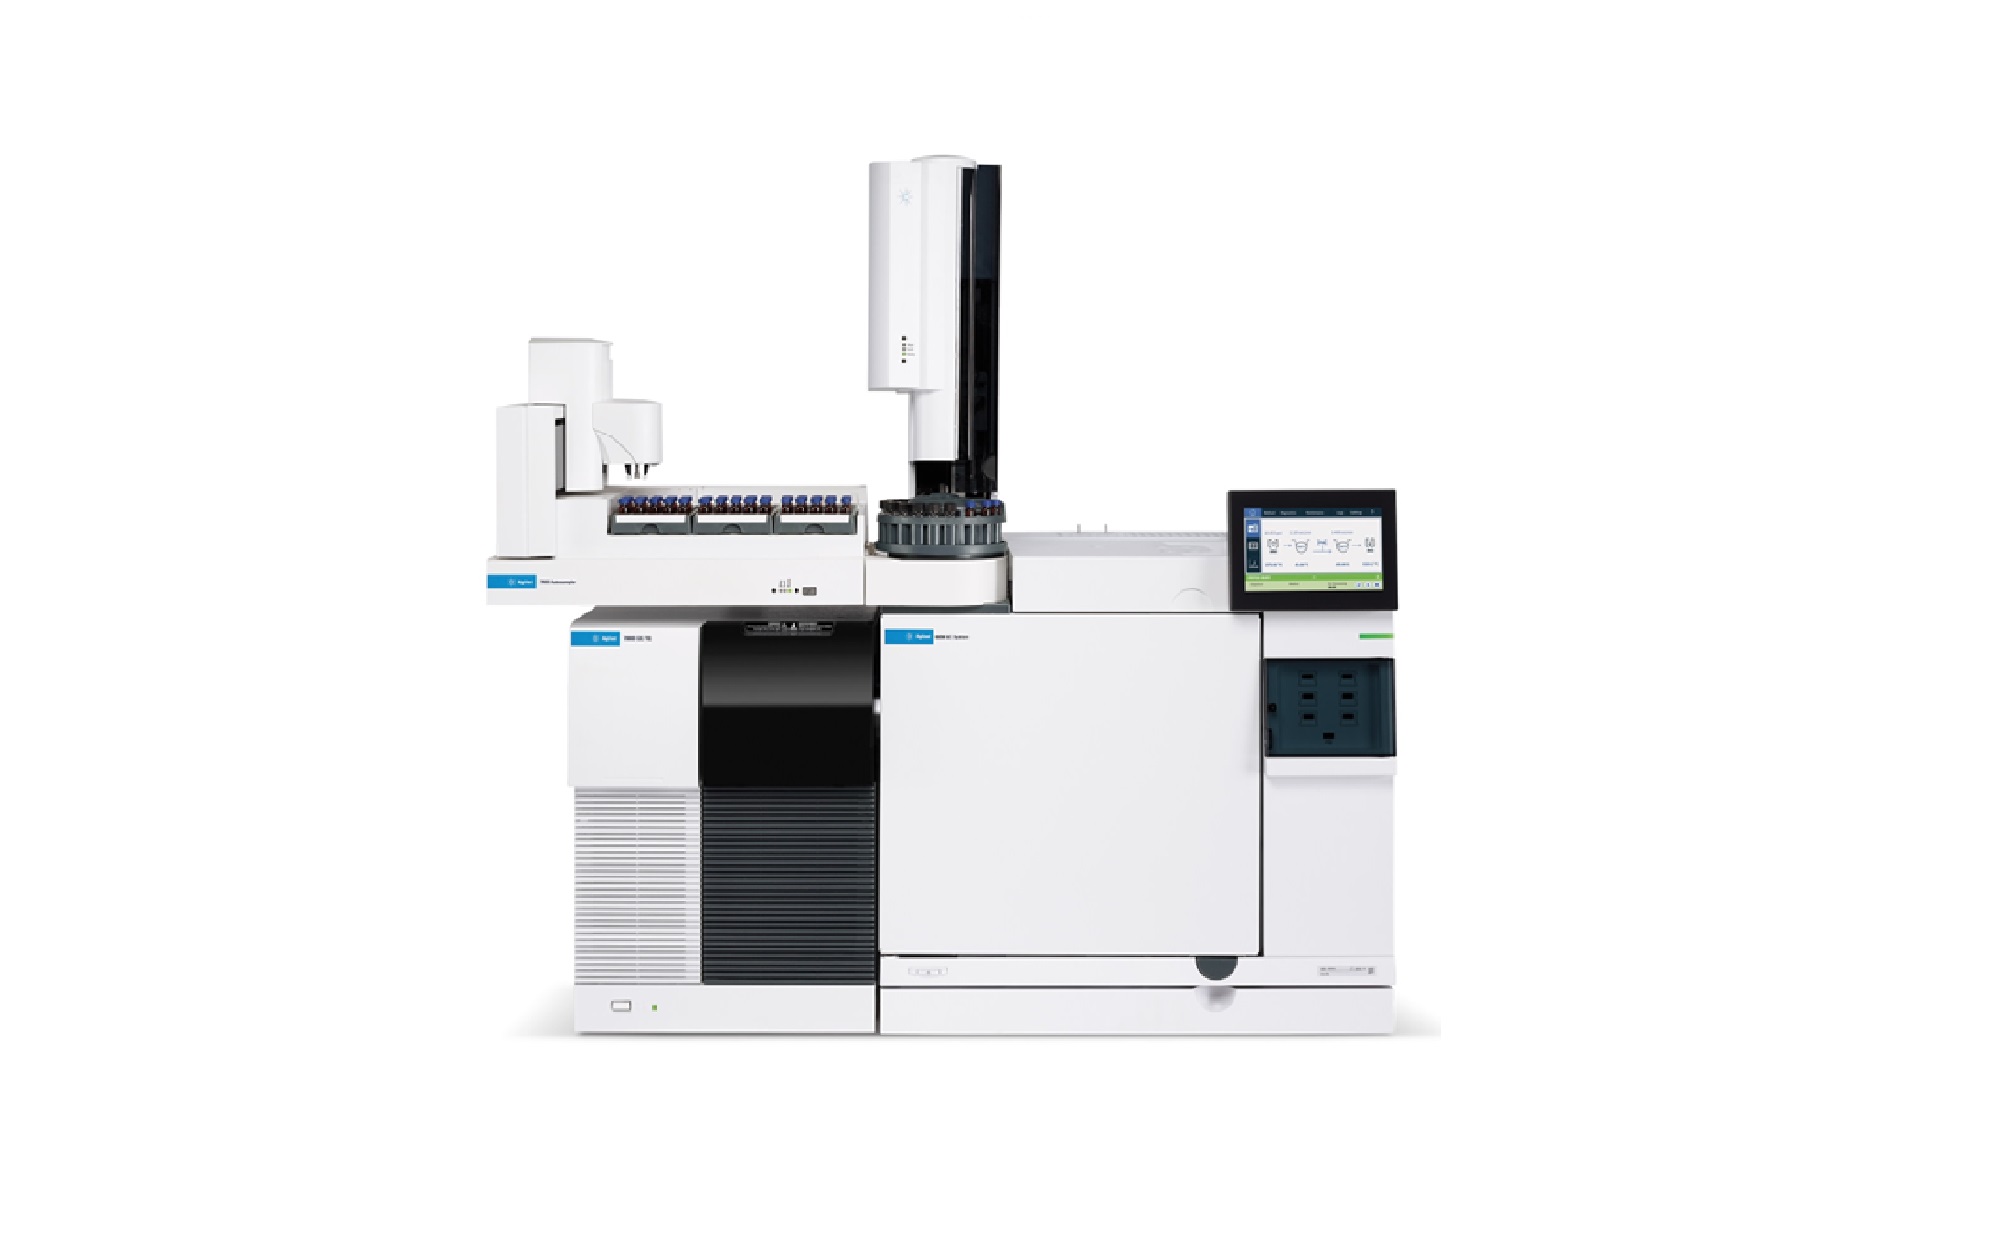 Enlarged view: Agilent GC-MS, used for liquid samples analysis.